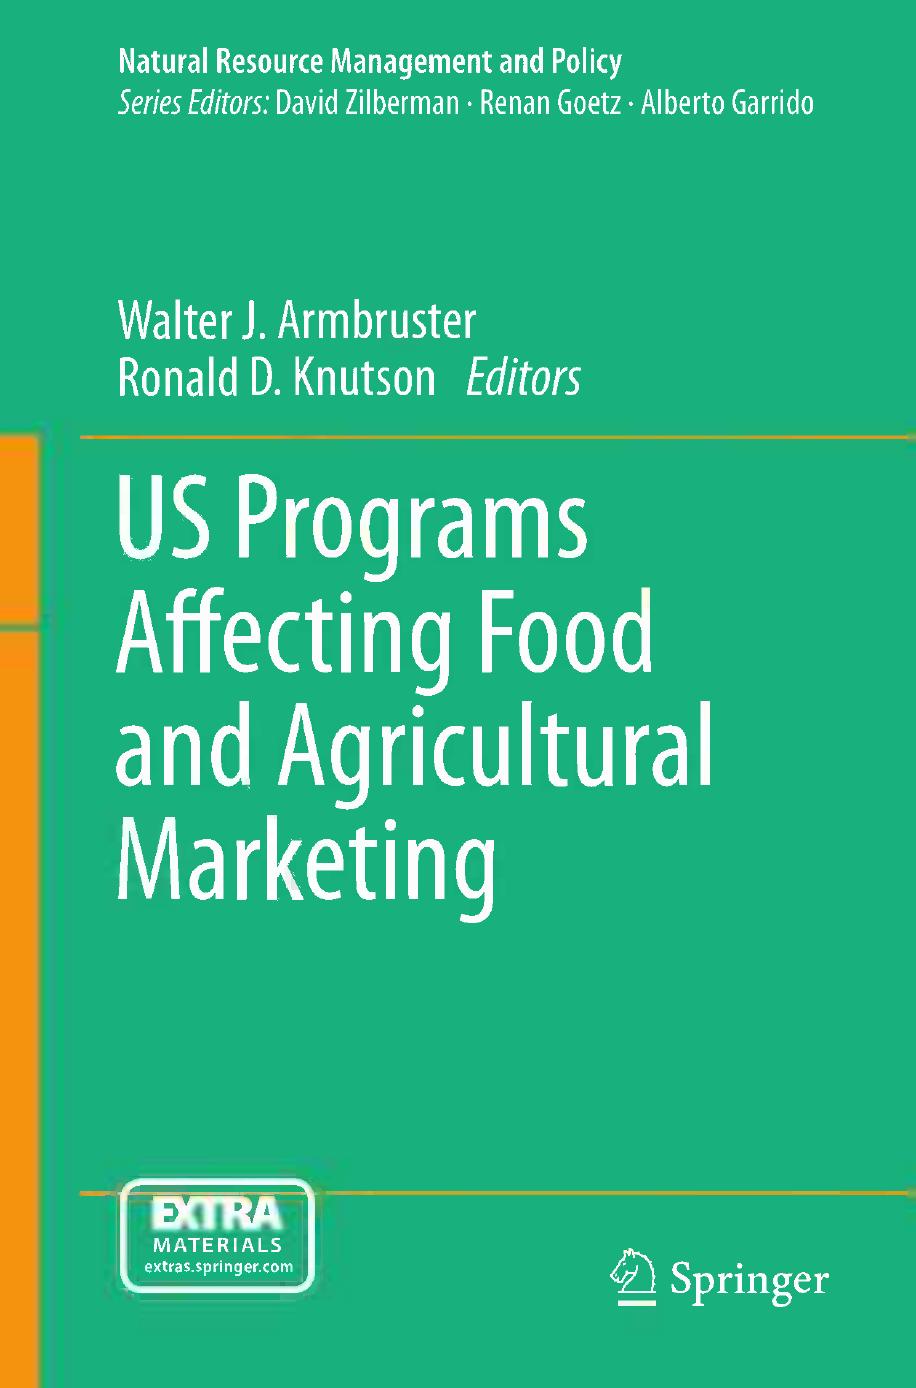 US Programs Affecting Food and Agricultural Marketing 2013